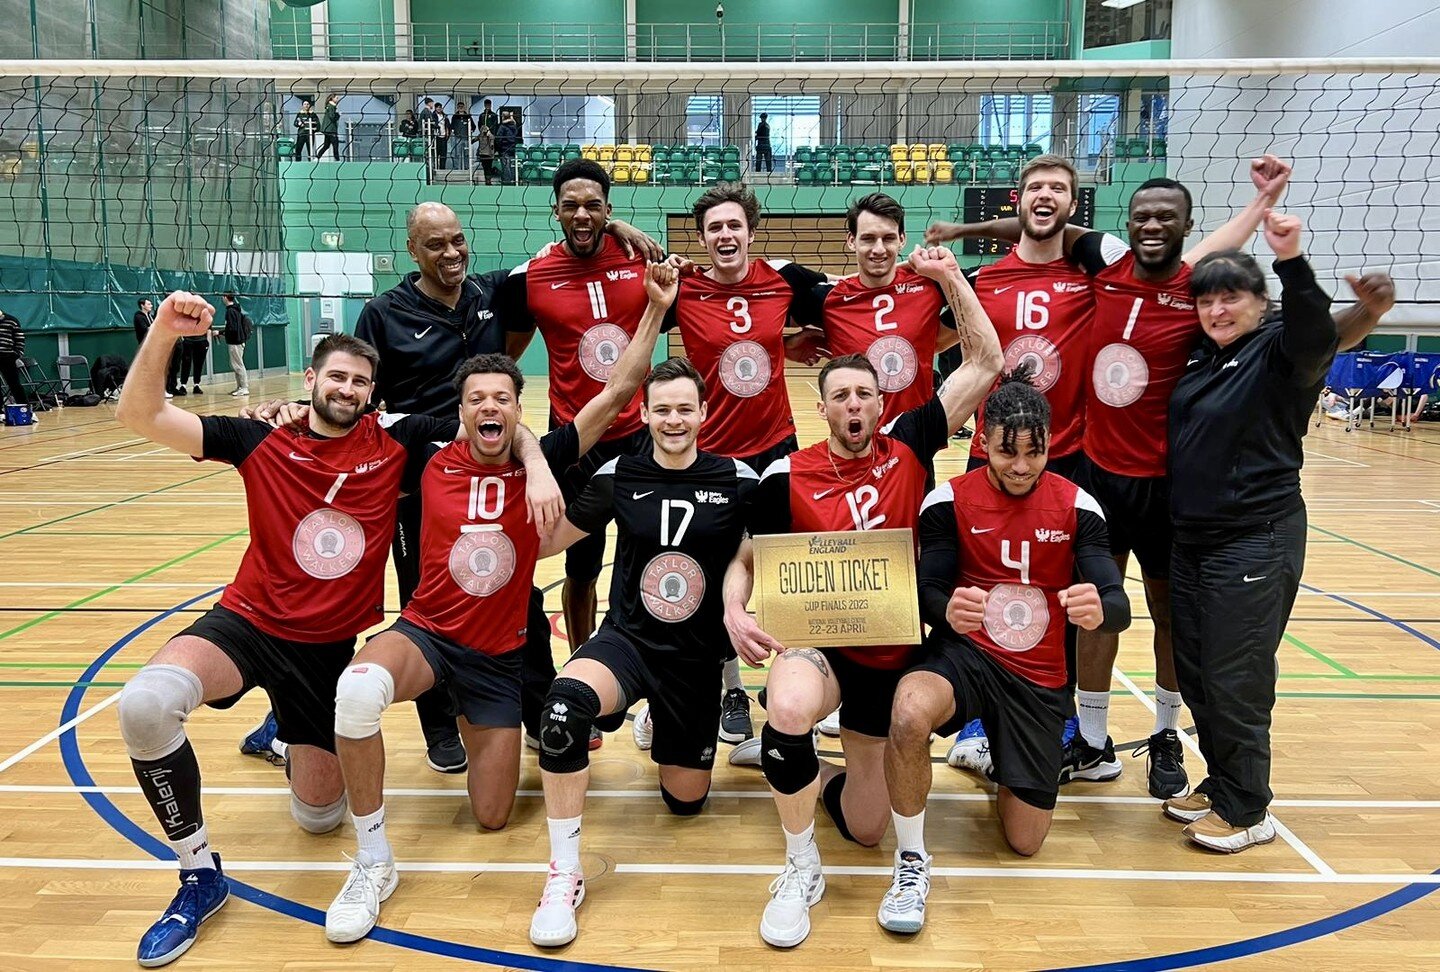 🔥 The past few weeks have been quite busy!

We marked 11 wins and 1 loss across all leagues (London League, Super League and National Cup). Including the golden ticket to the Cup finals with our Super League Mens squad. Essex Rebels see you in Kette